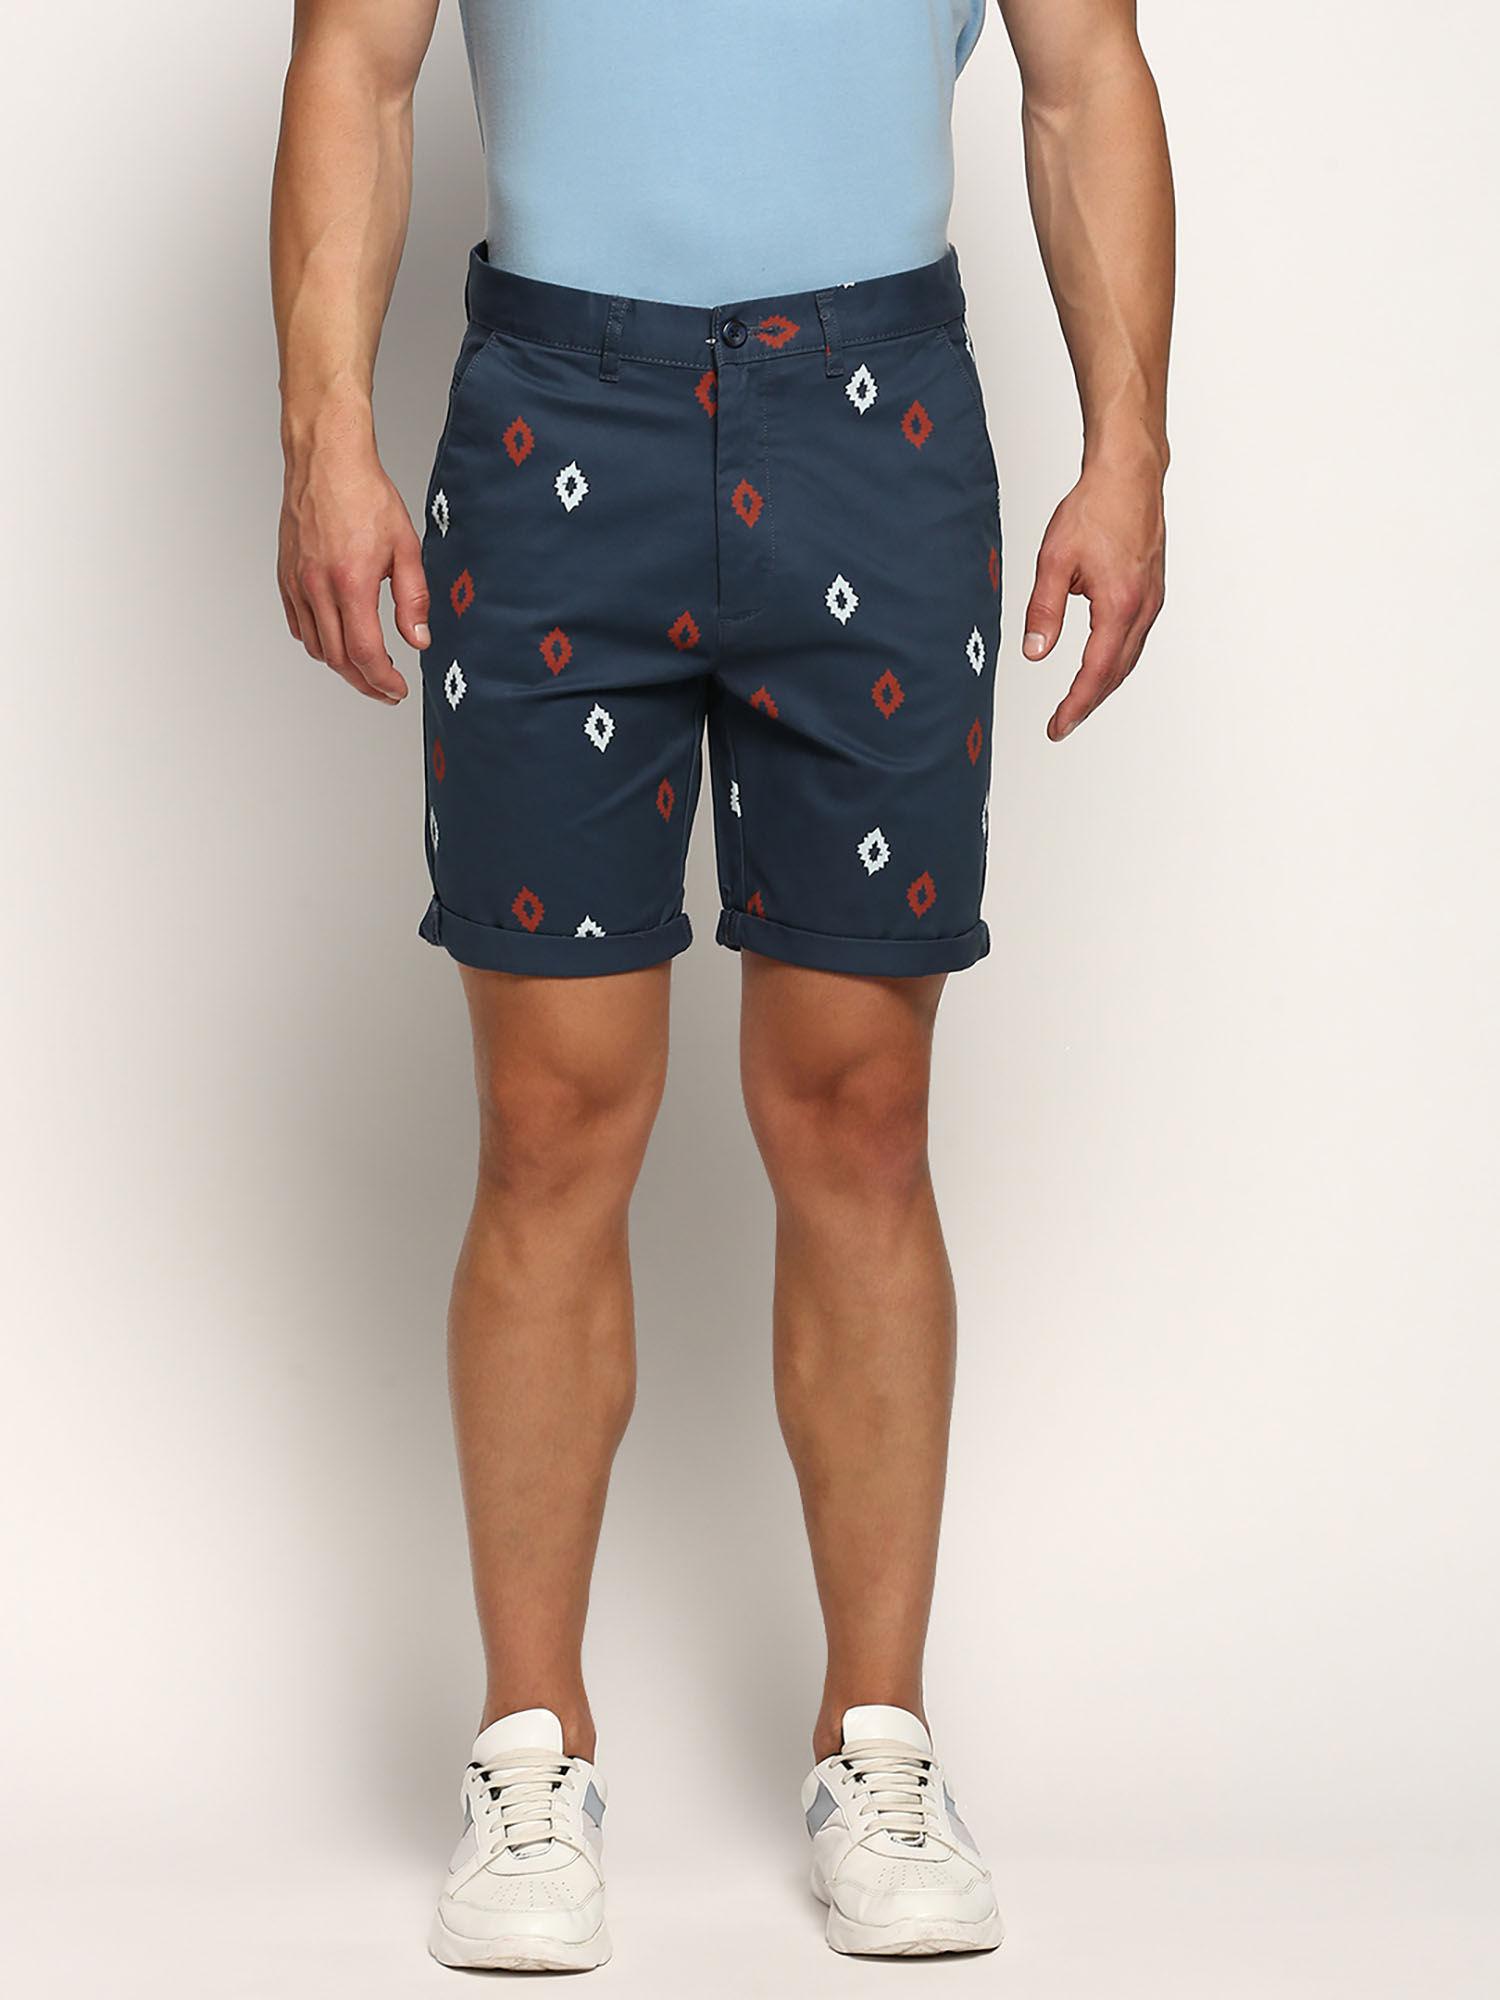 mens mid-rise above knee printed teal cotton short